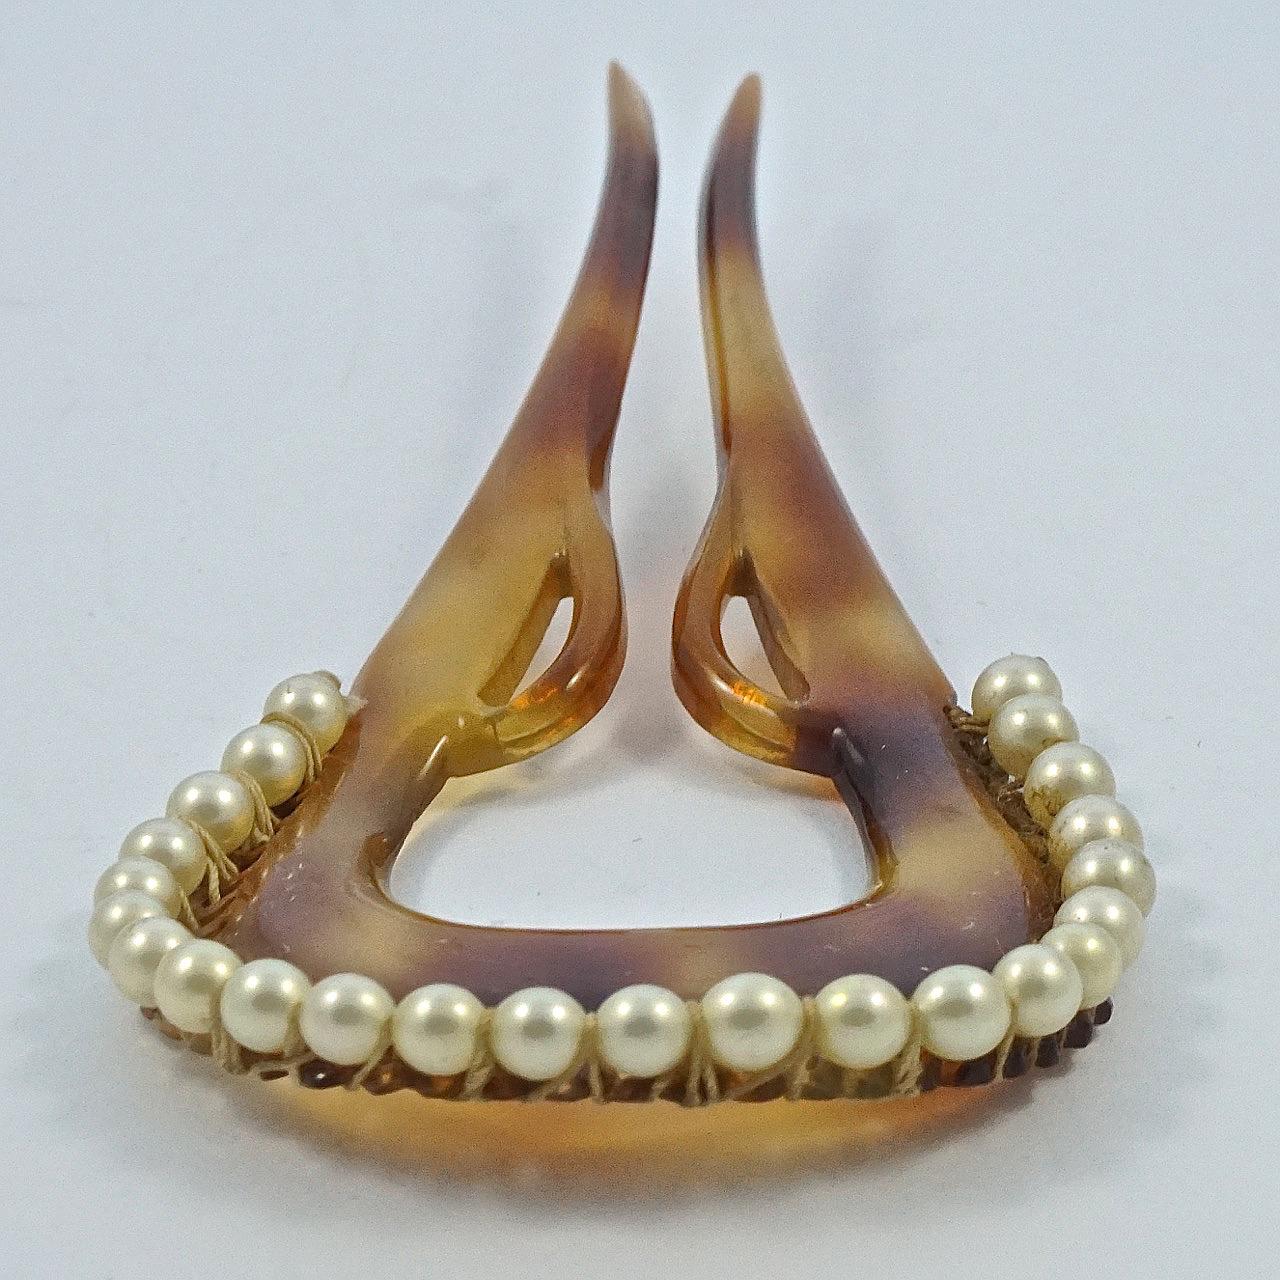 Wonderful Art Deco faux tortoiseshell two prong hair comb with faux pearl decoration. Measuring length 9.8cm / 3.85 inches by width 4.2cm / 1.65 inches. The lovely pearls have an iridescent sheen, and have been hand threaded on to the comb. The hair